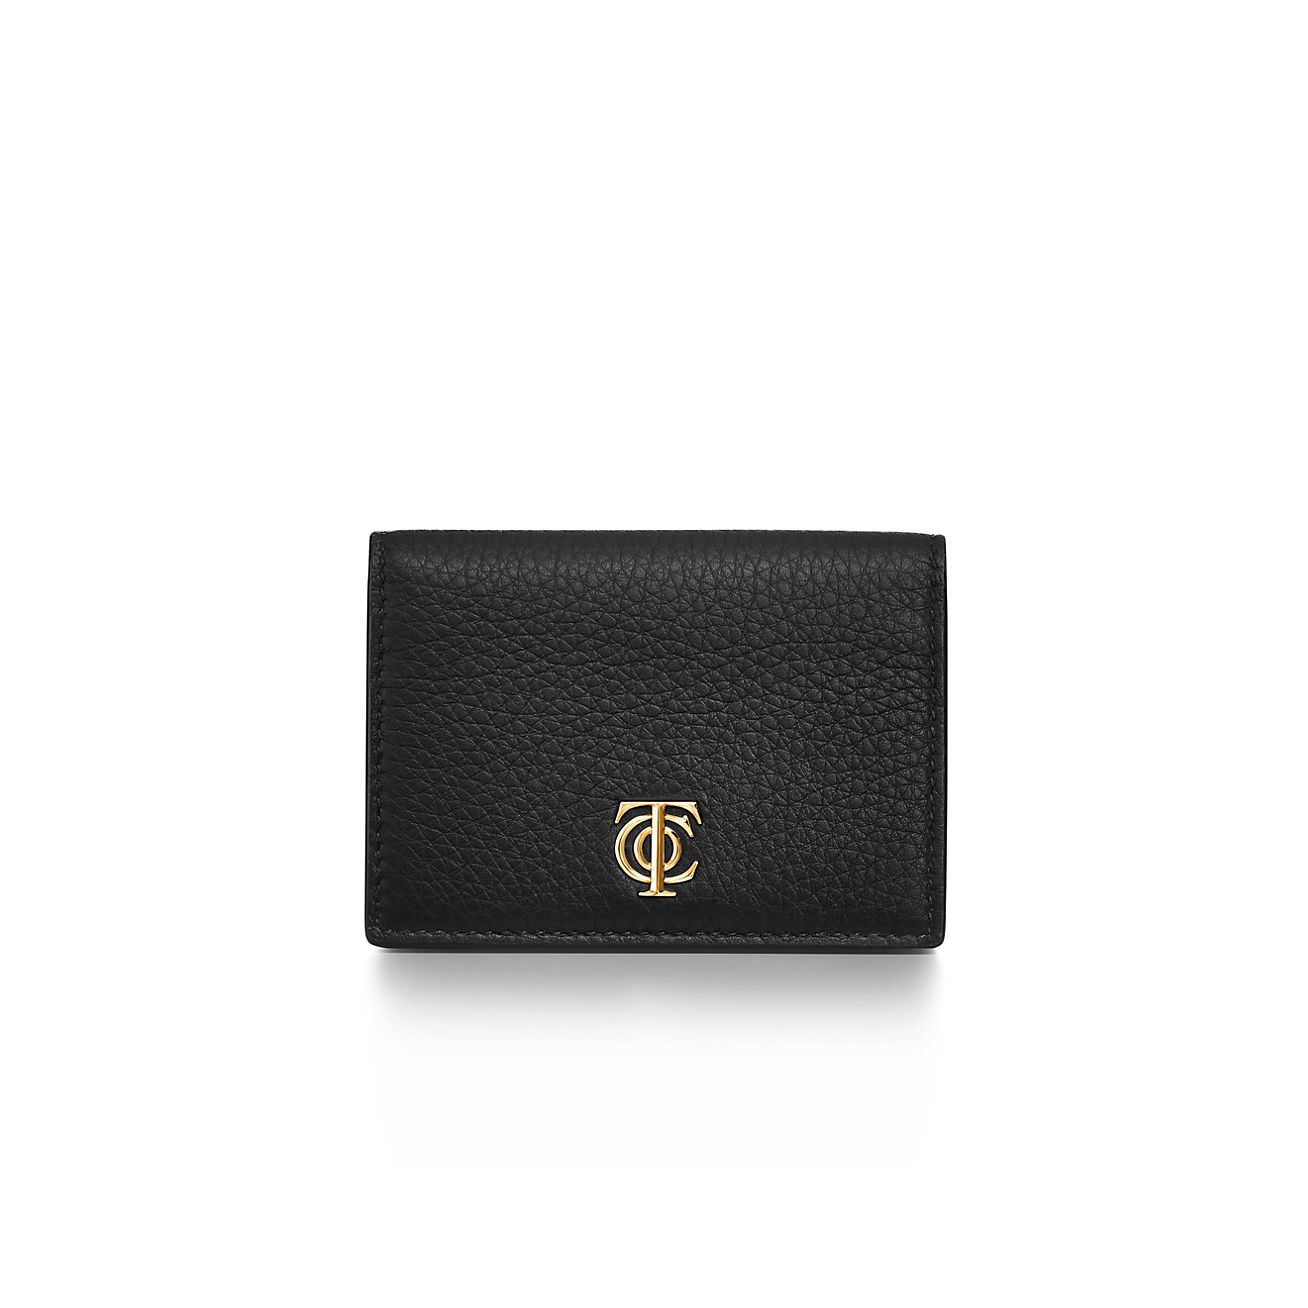 T&co. Flap Card Holder in Black Leather